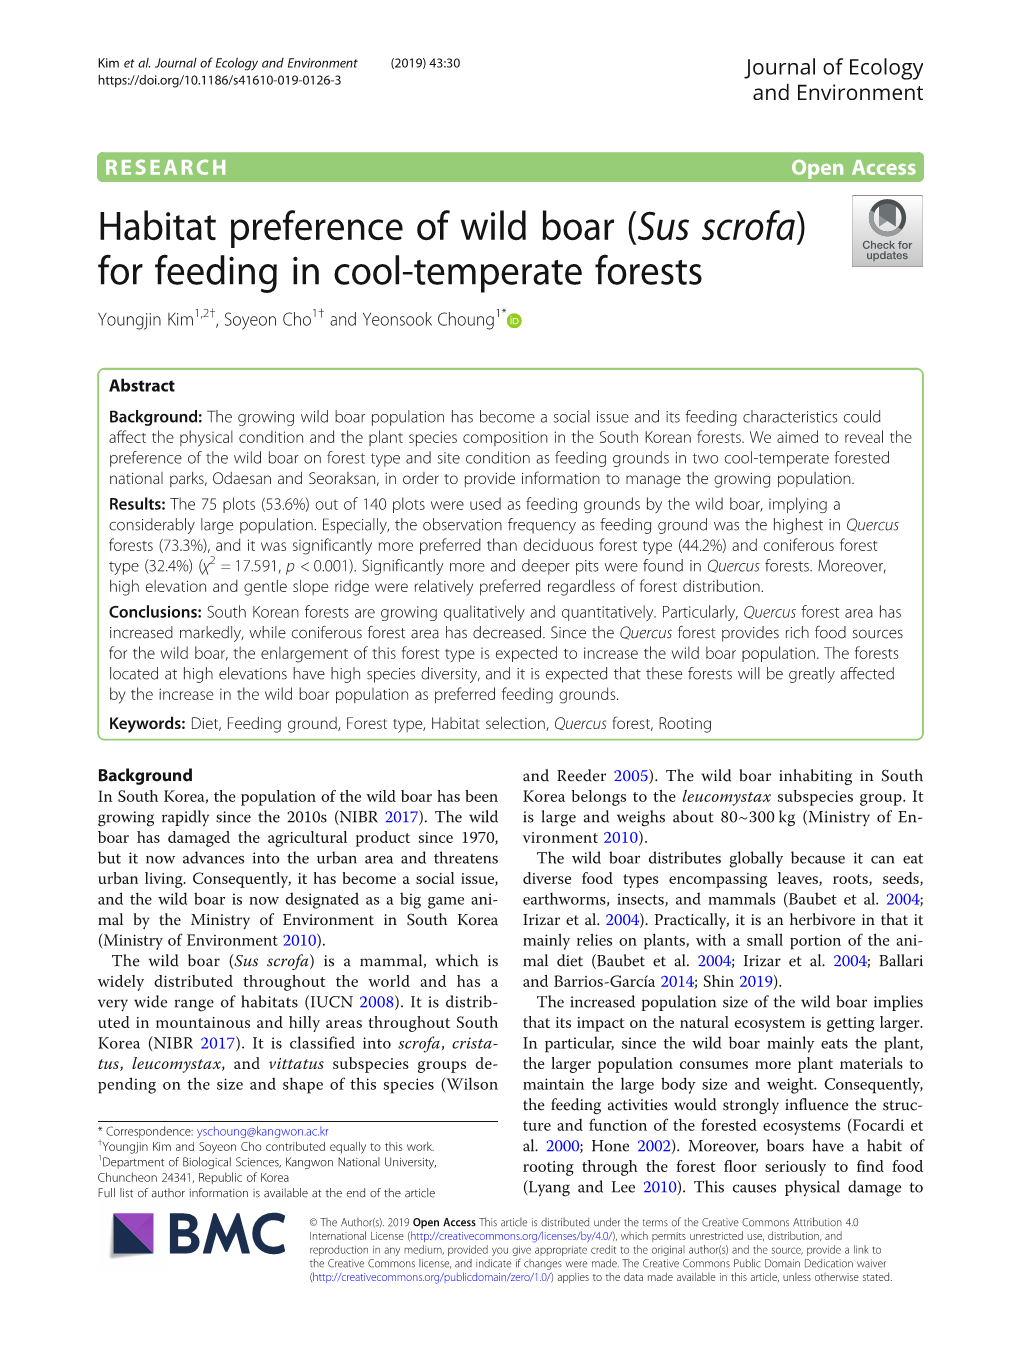 Habitat Preference of Wild Boar (Sus Scrofa) for Feeding in Cool-Temperate Forests Youngjin Kim1,2†, Soyeon Cho1† and Yeonsook Choung1*